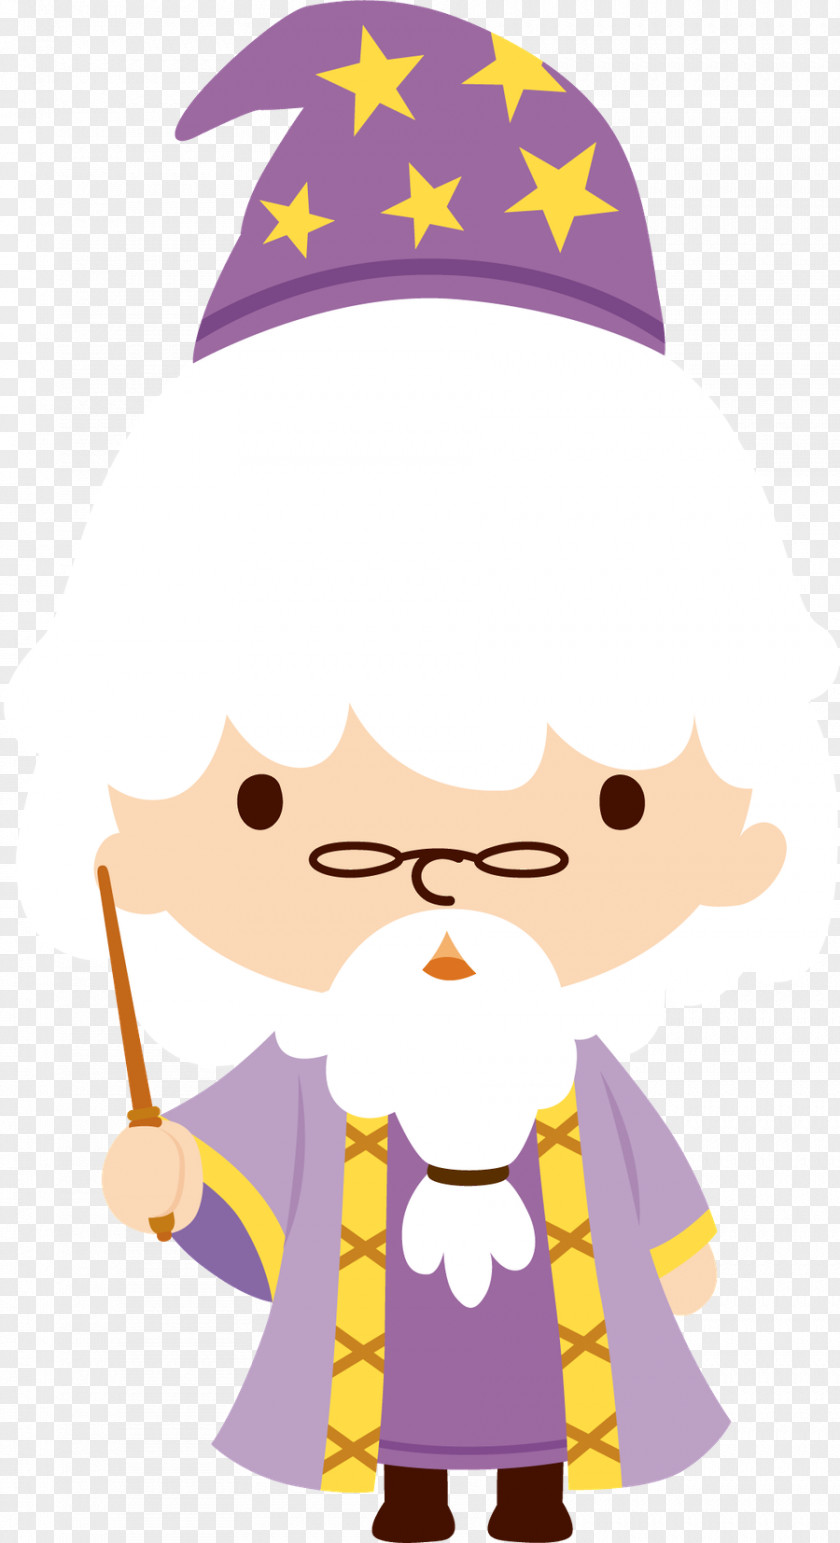 Harry Potter (Literary Series) Professor Albus Dumbledore Clip Art And The Philosopher's Stone PNG